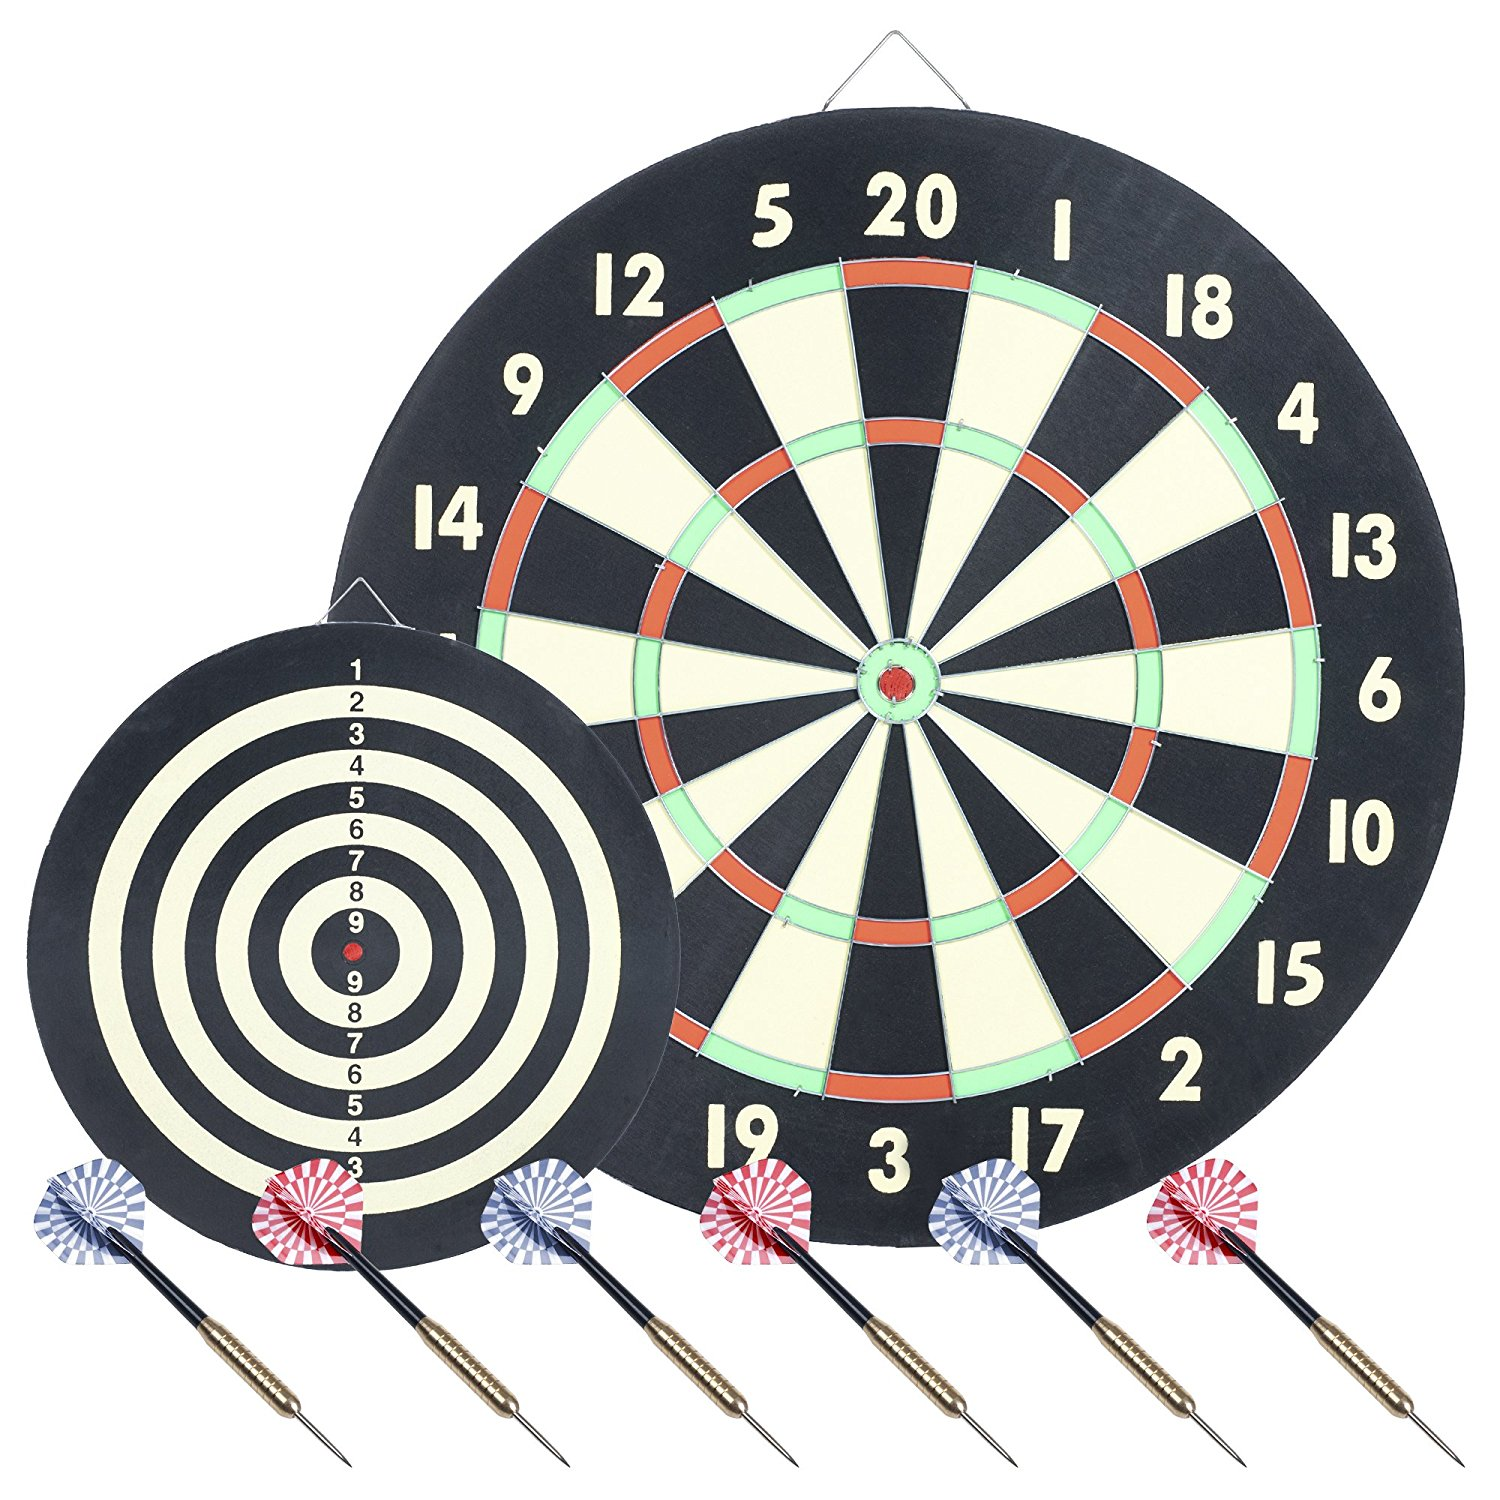 Trademark Global Game Room Dartboard Set with 6 Darts Only $15.96 Shipped For Prime Members!